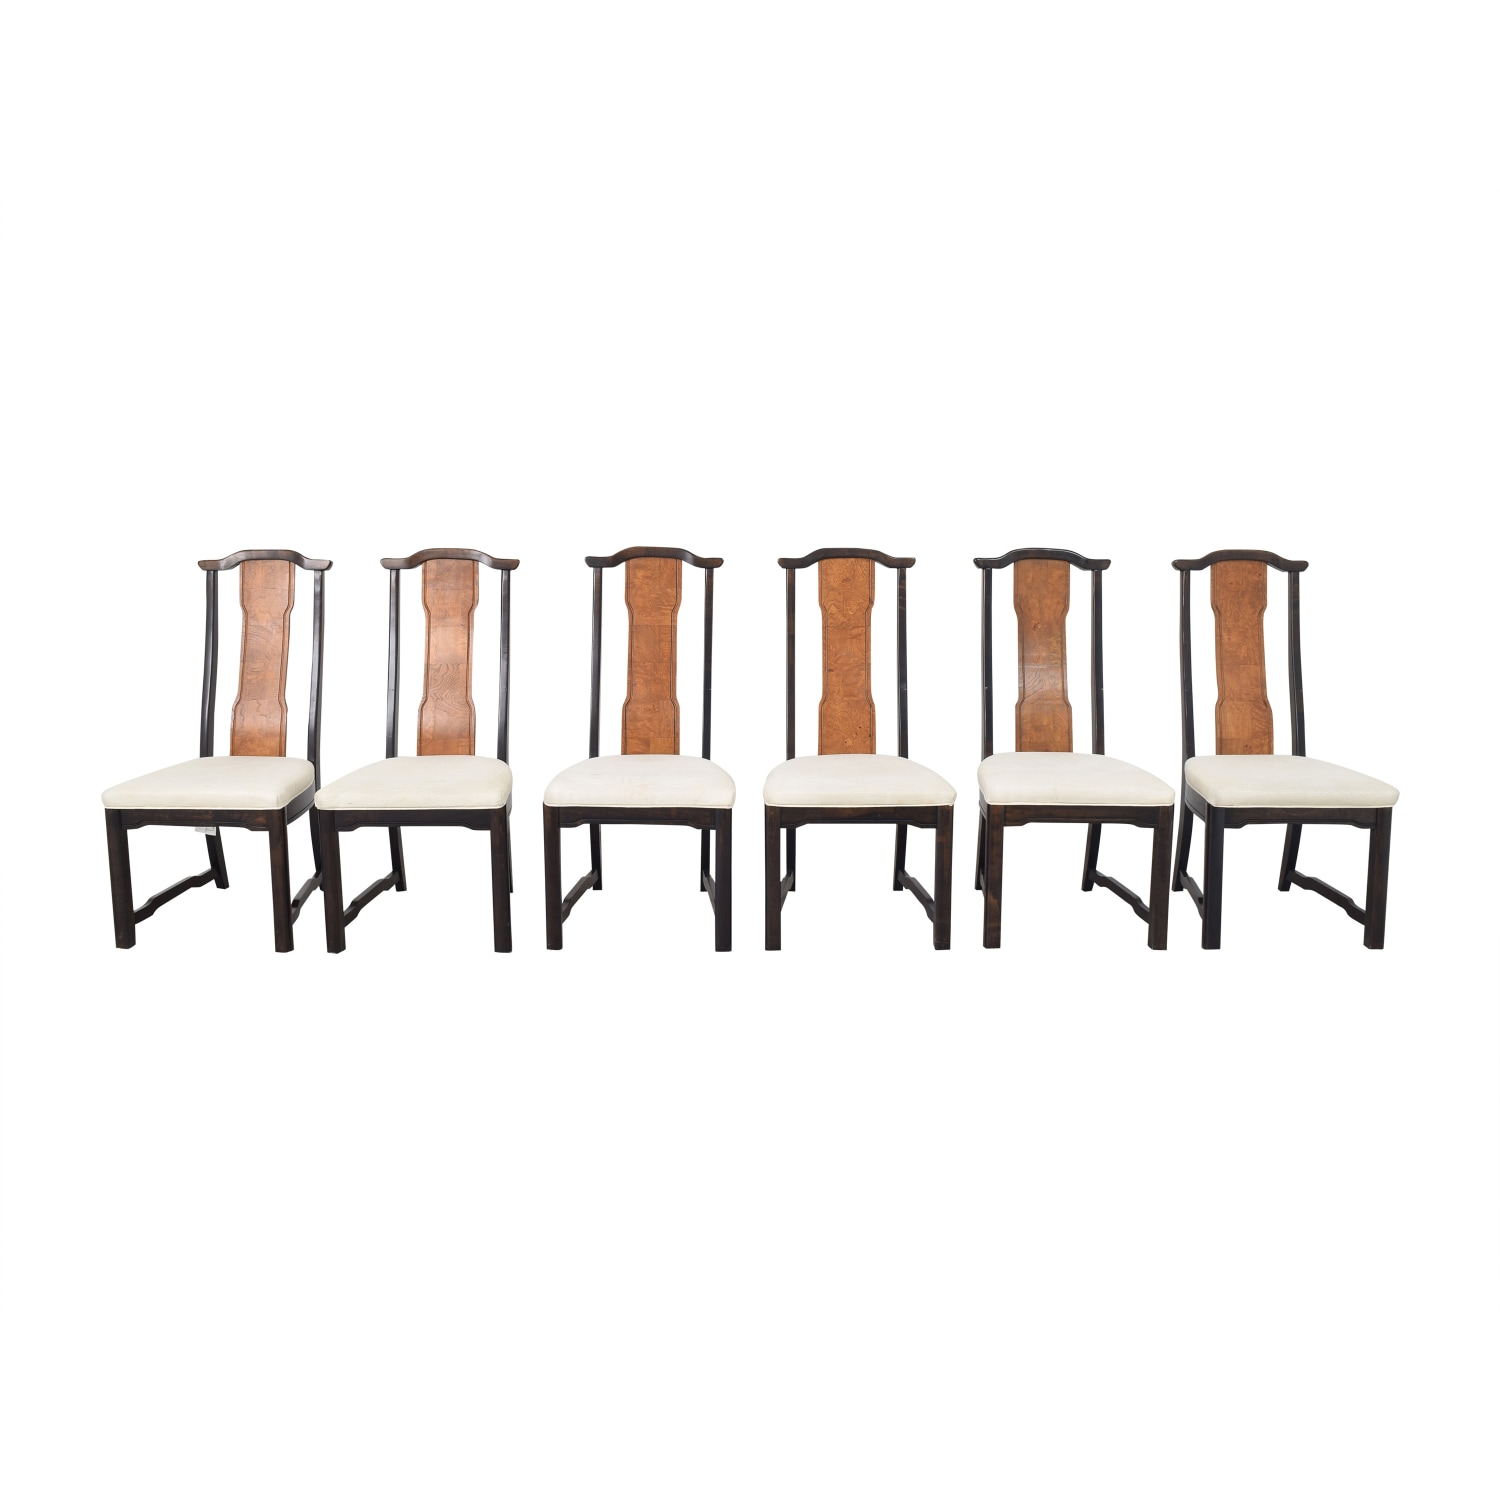 Broyhill Furniture Broyhill Furniture Ming Collection Dining Chairs